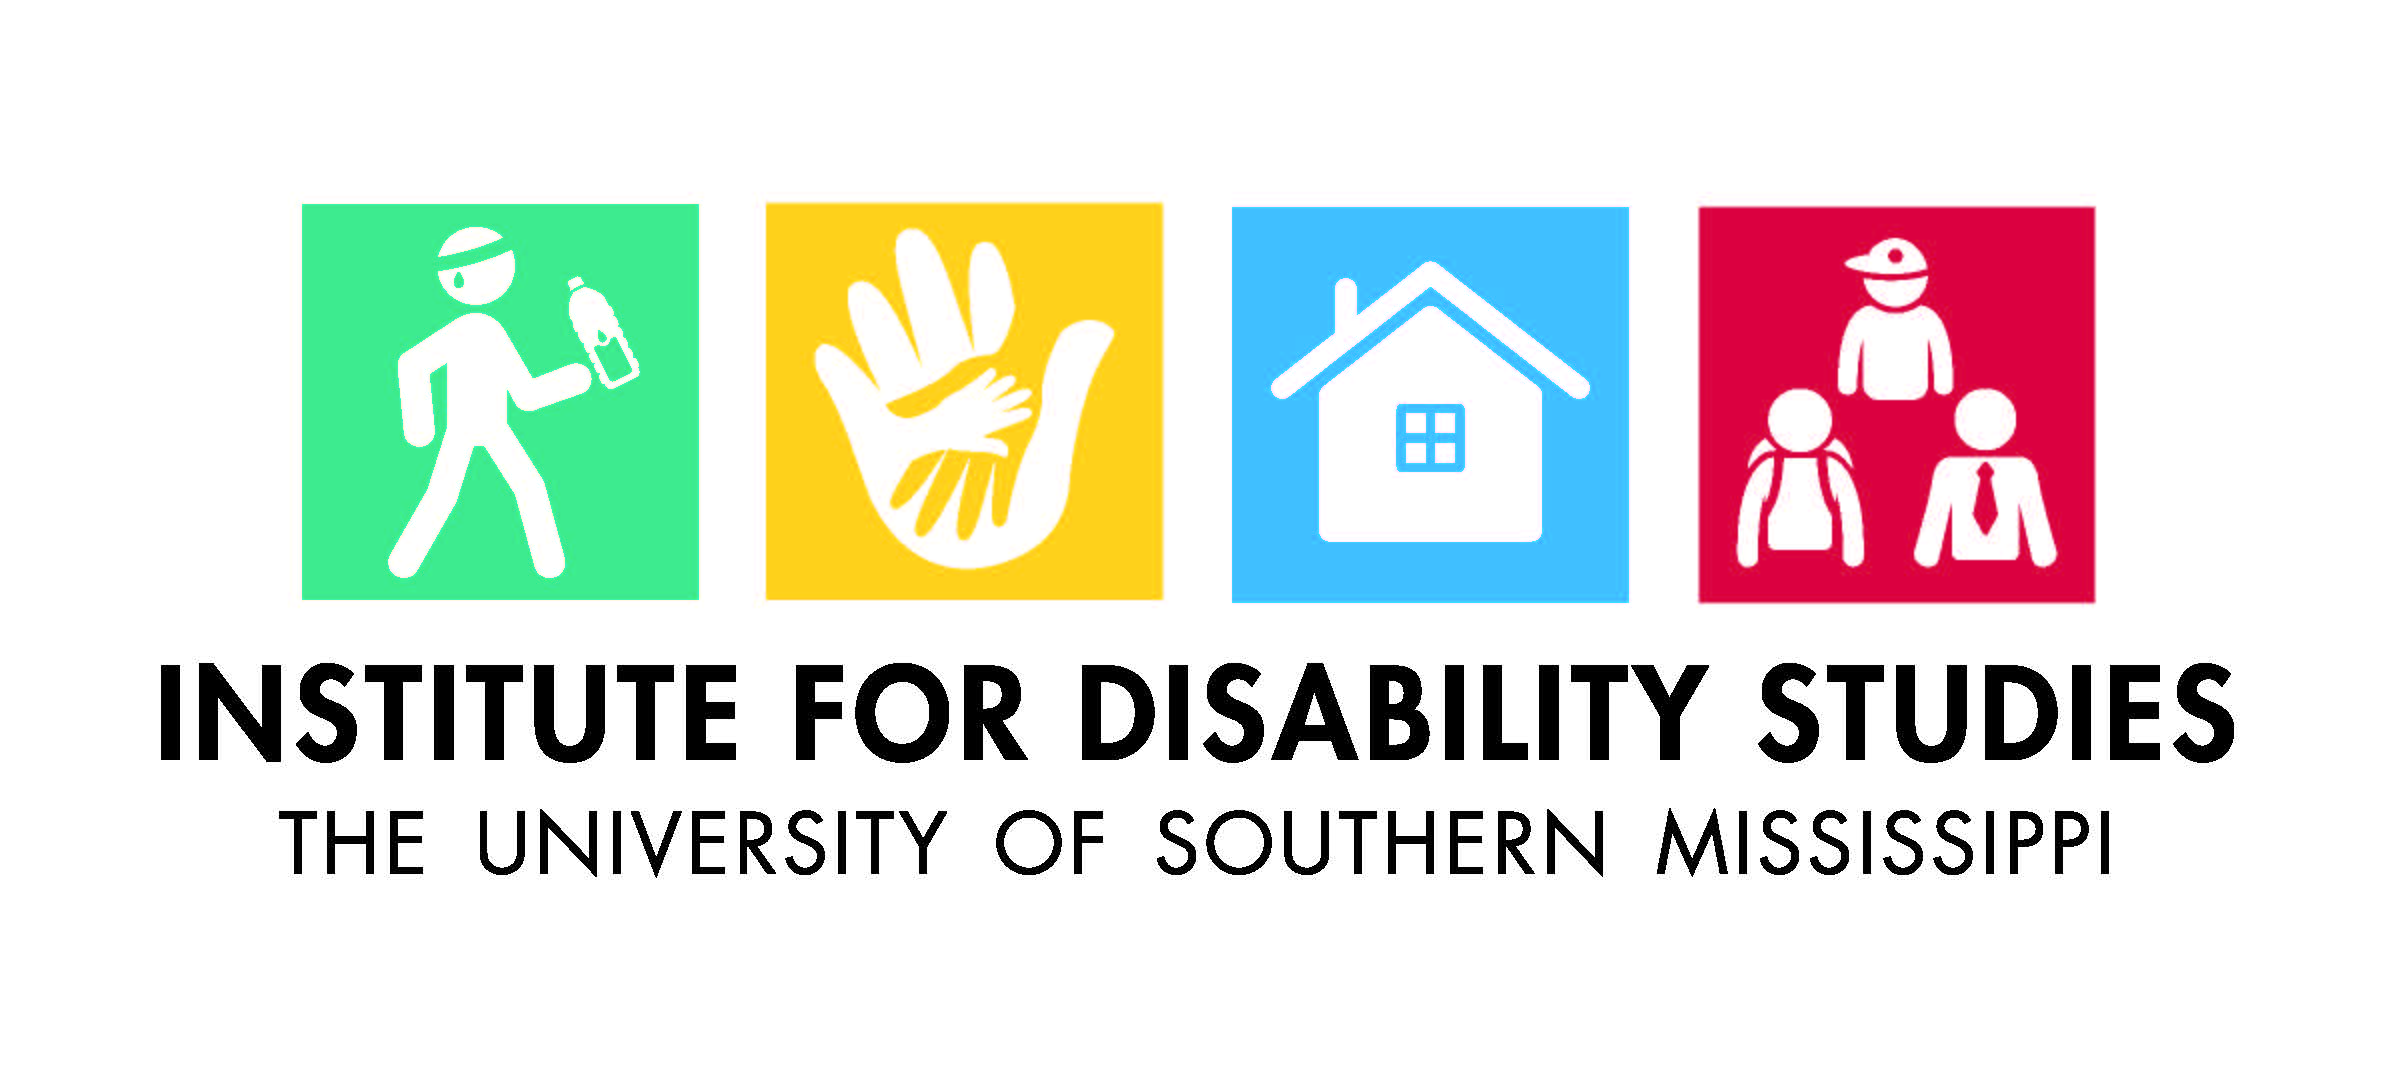 The Institute for Disability Studies